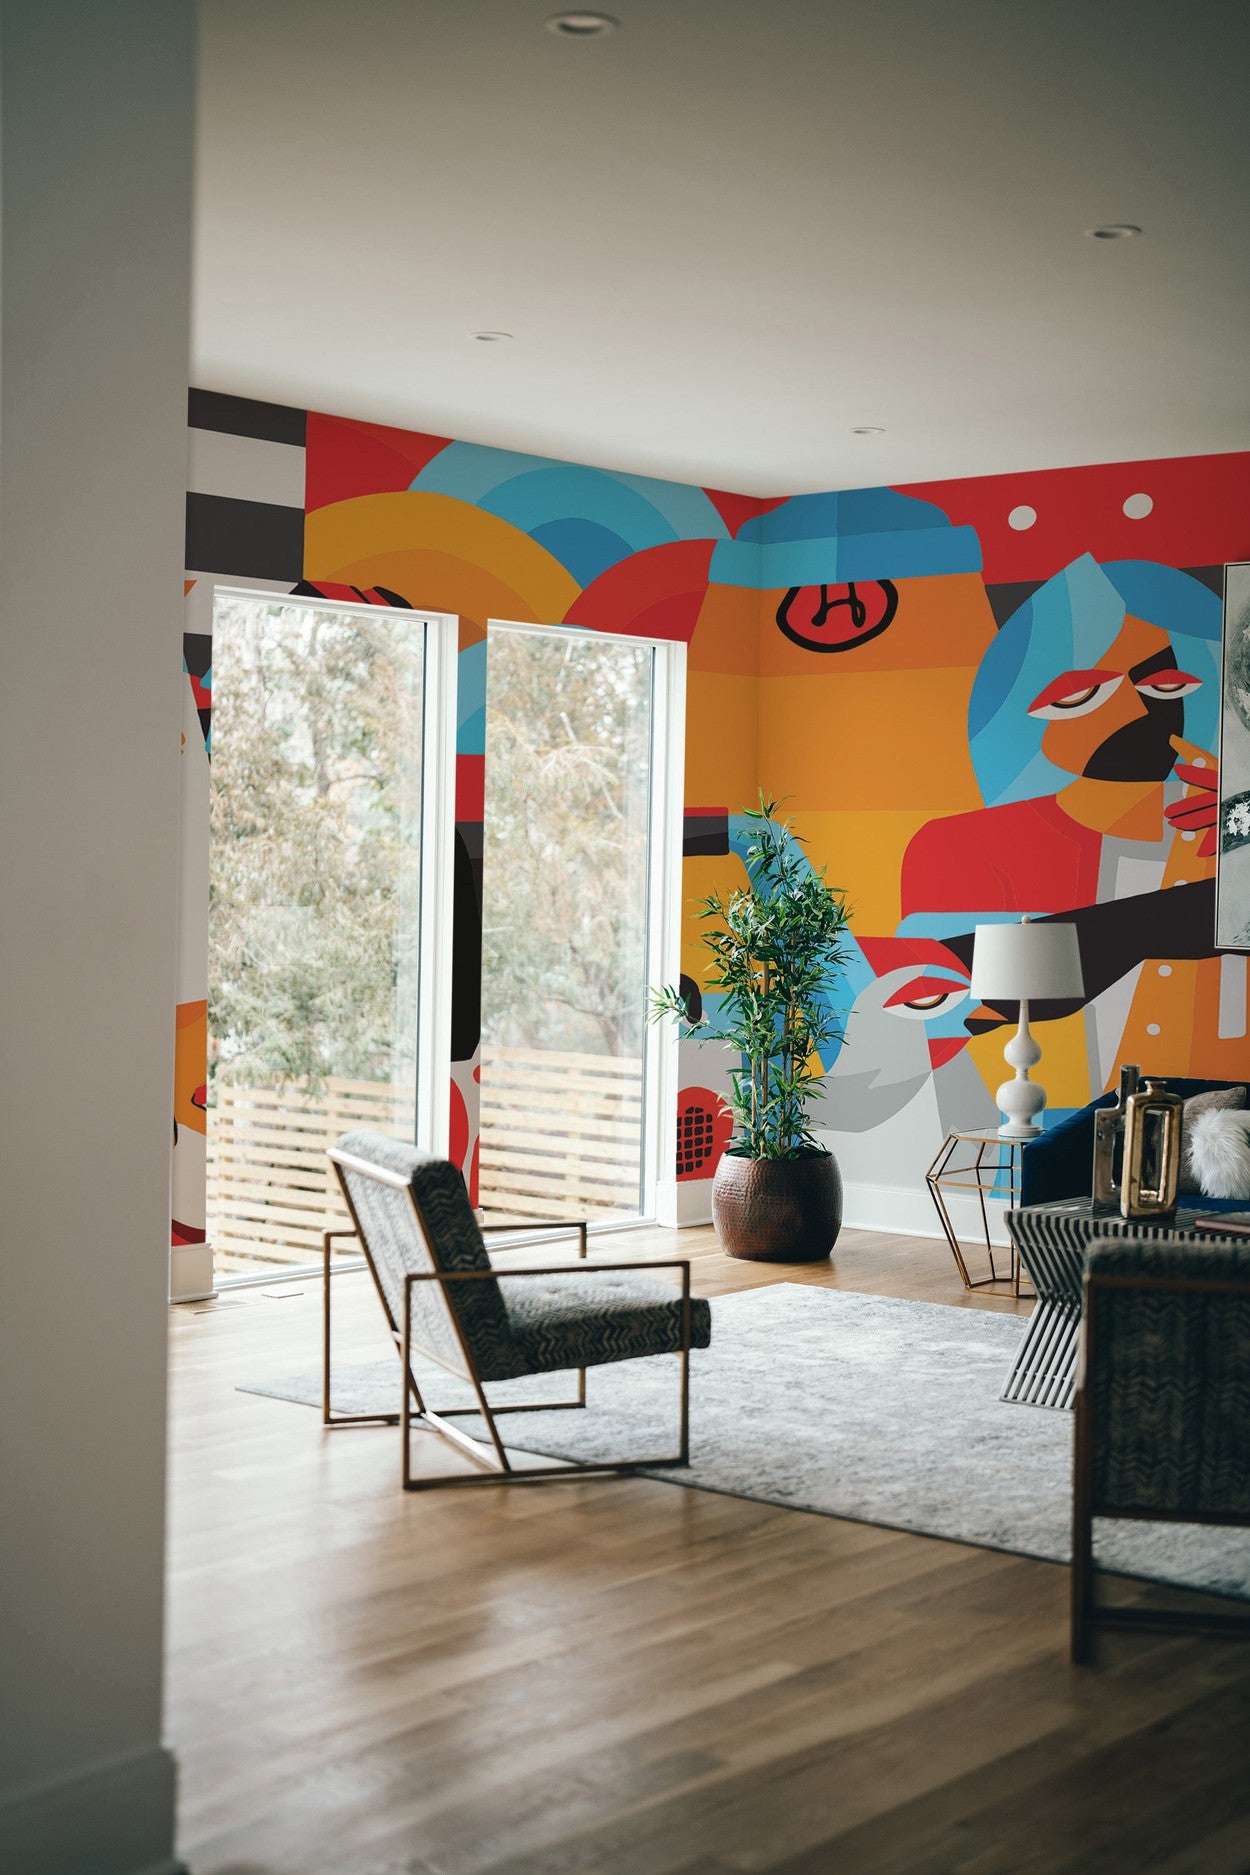 Interior room with modern abstract wall mural, armchair, and houseplant